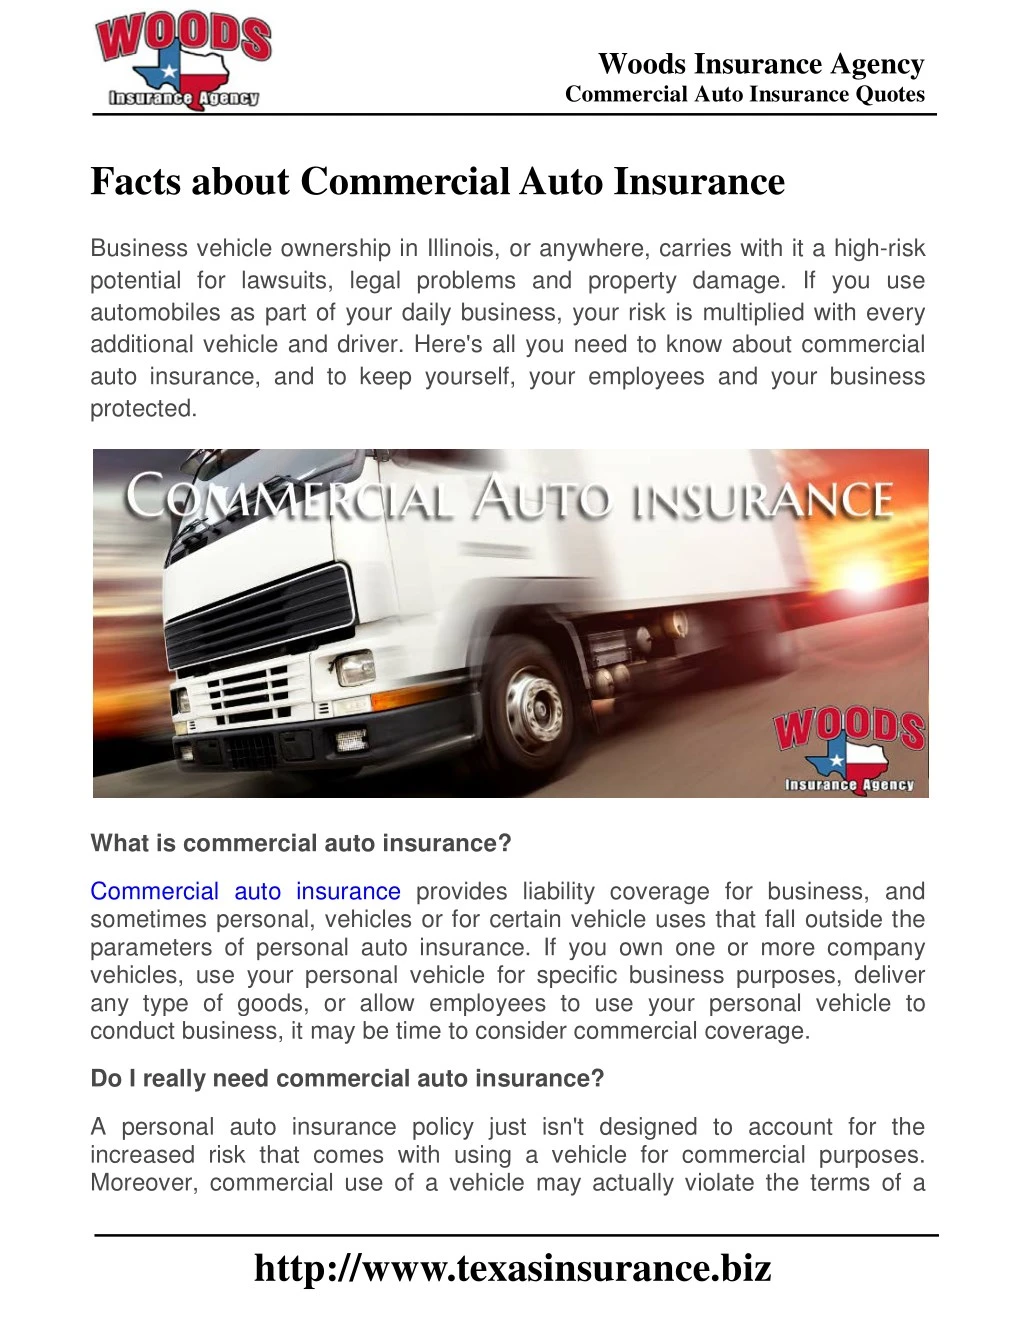 woods insurance agency commercial auto insurance